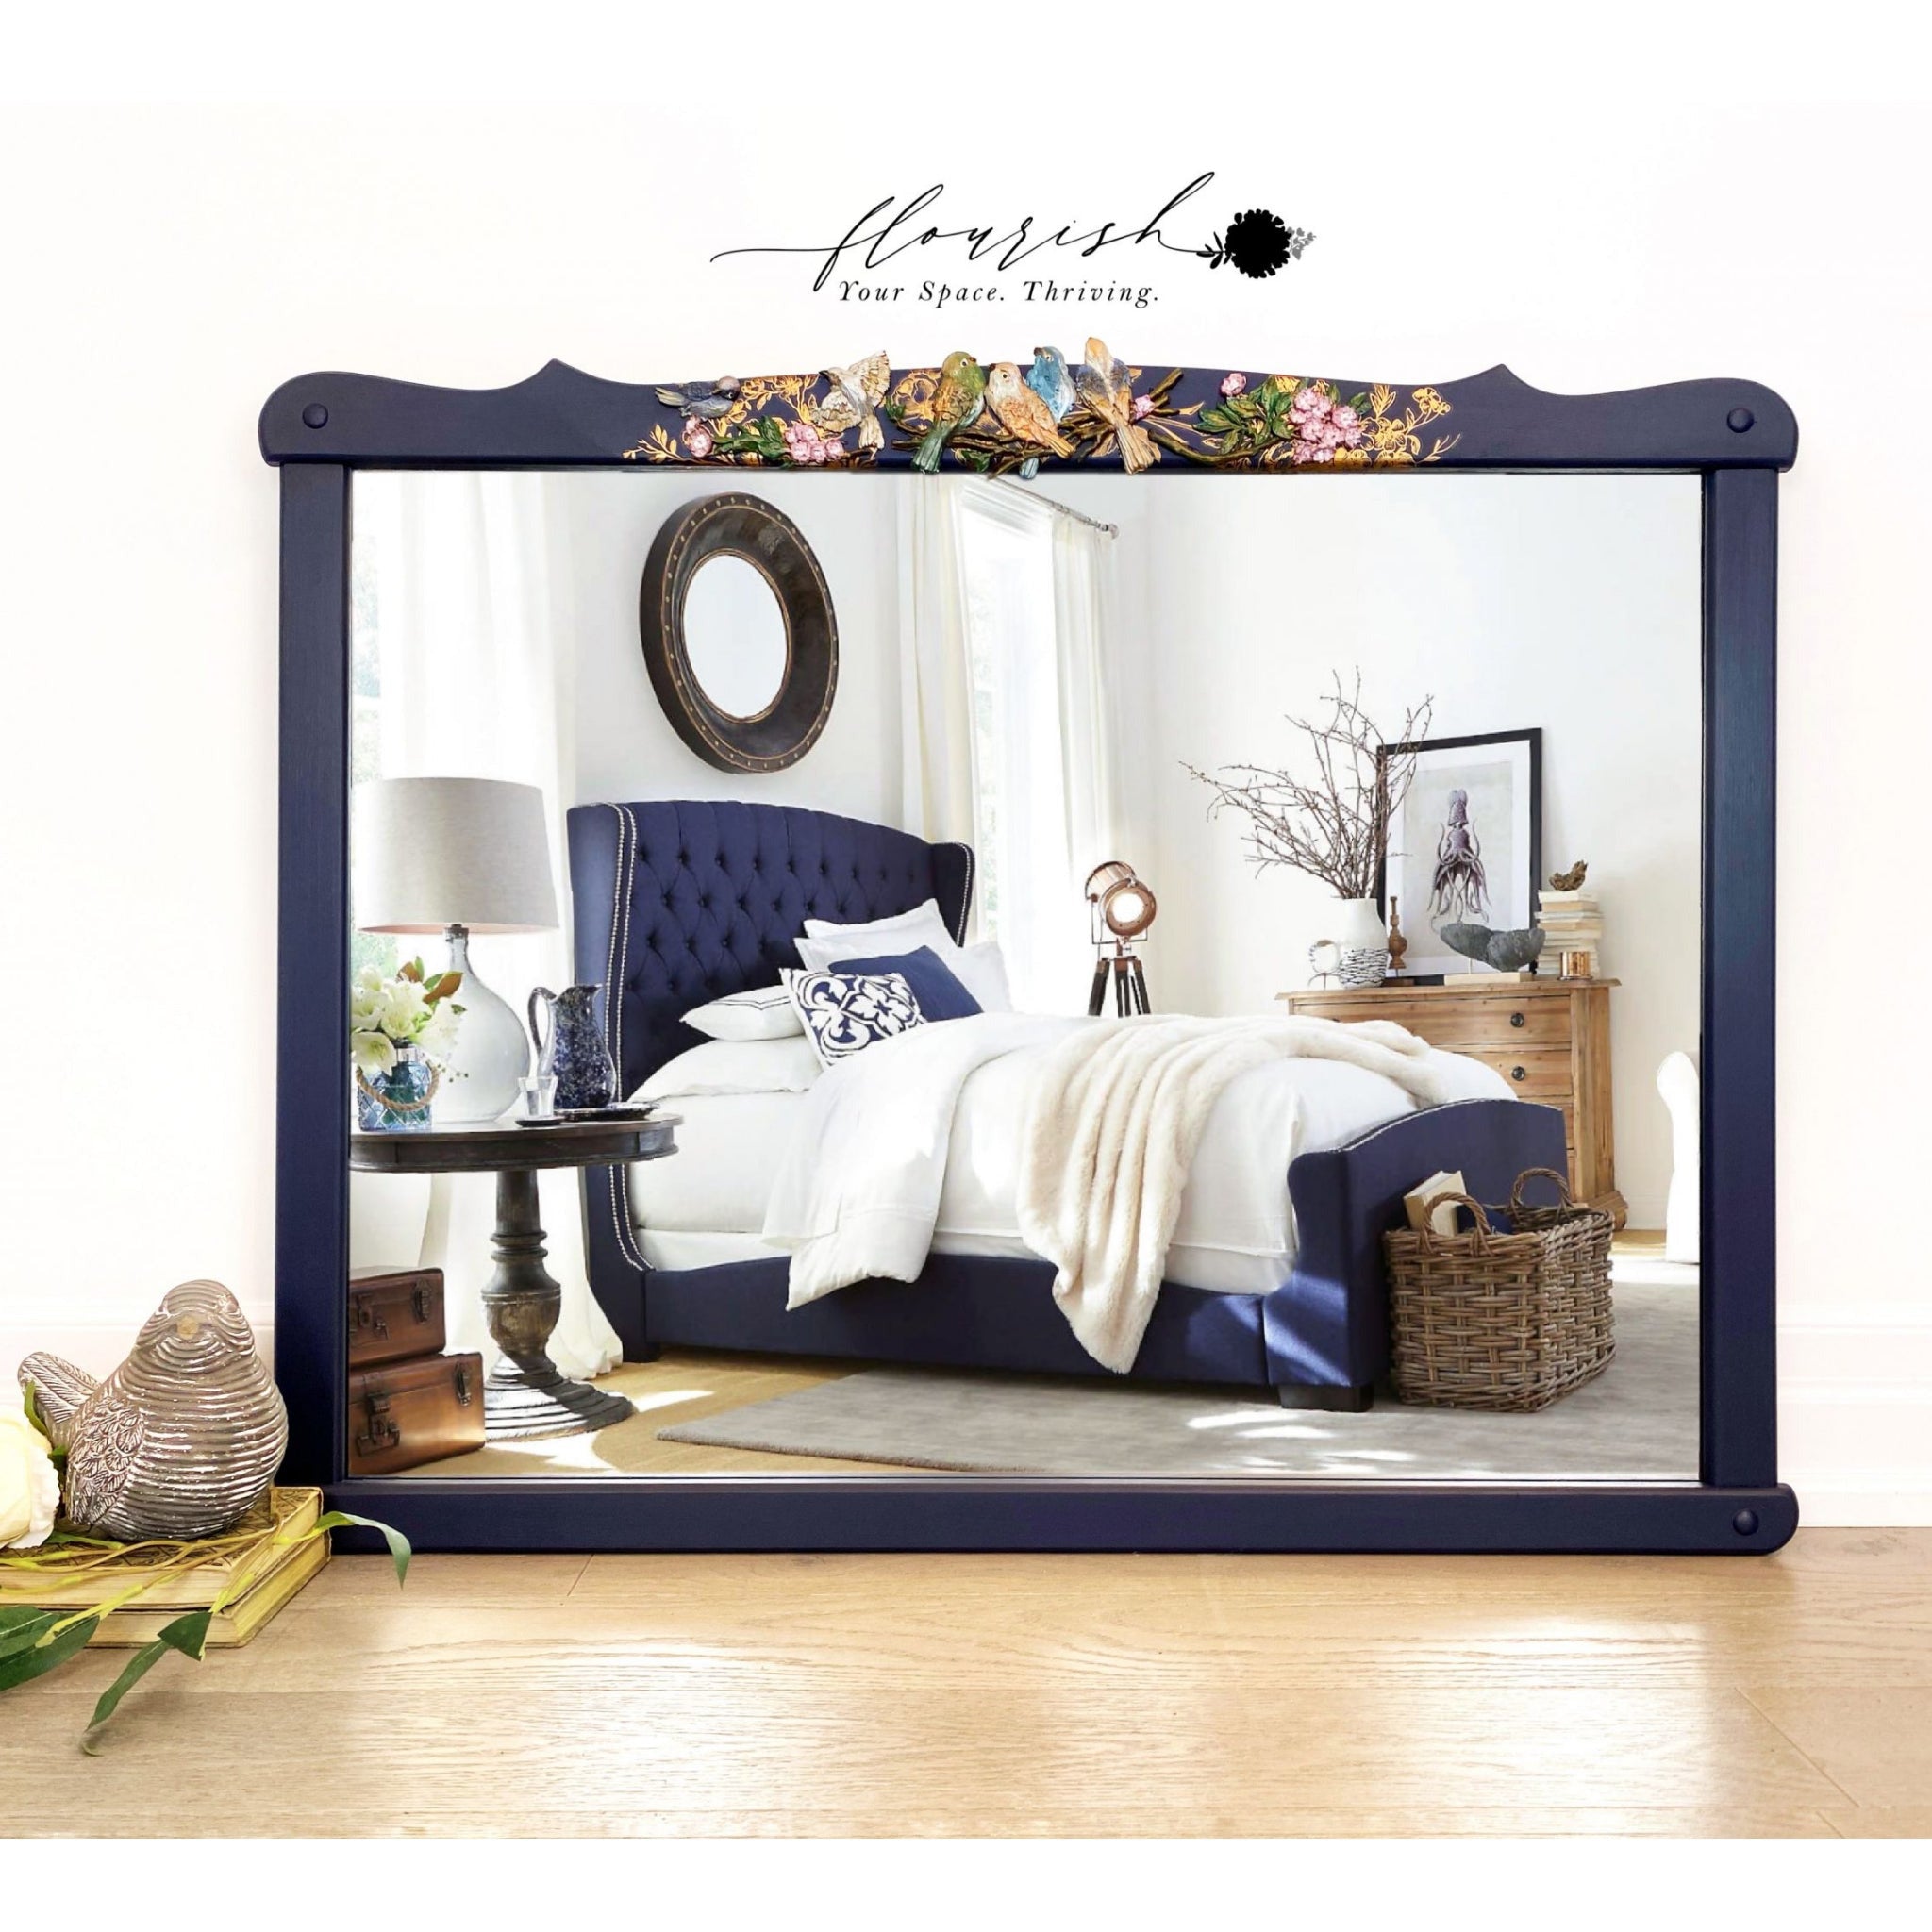 A blue framed mirror refurbished by Flourish You Space Thriving features the Avian Love silicone mould at the top.